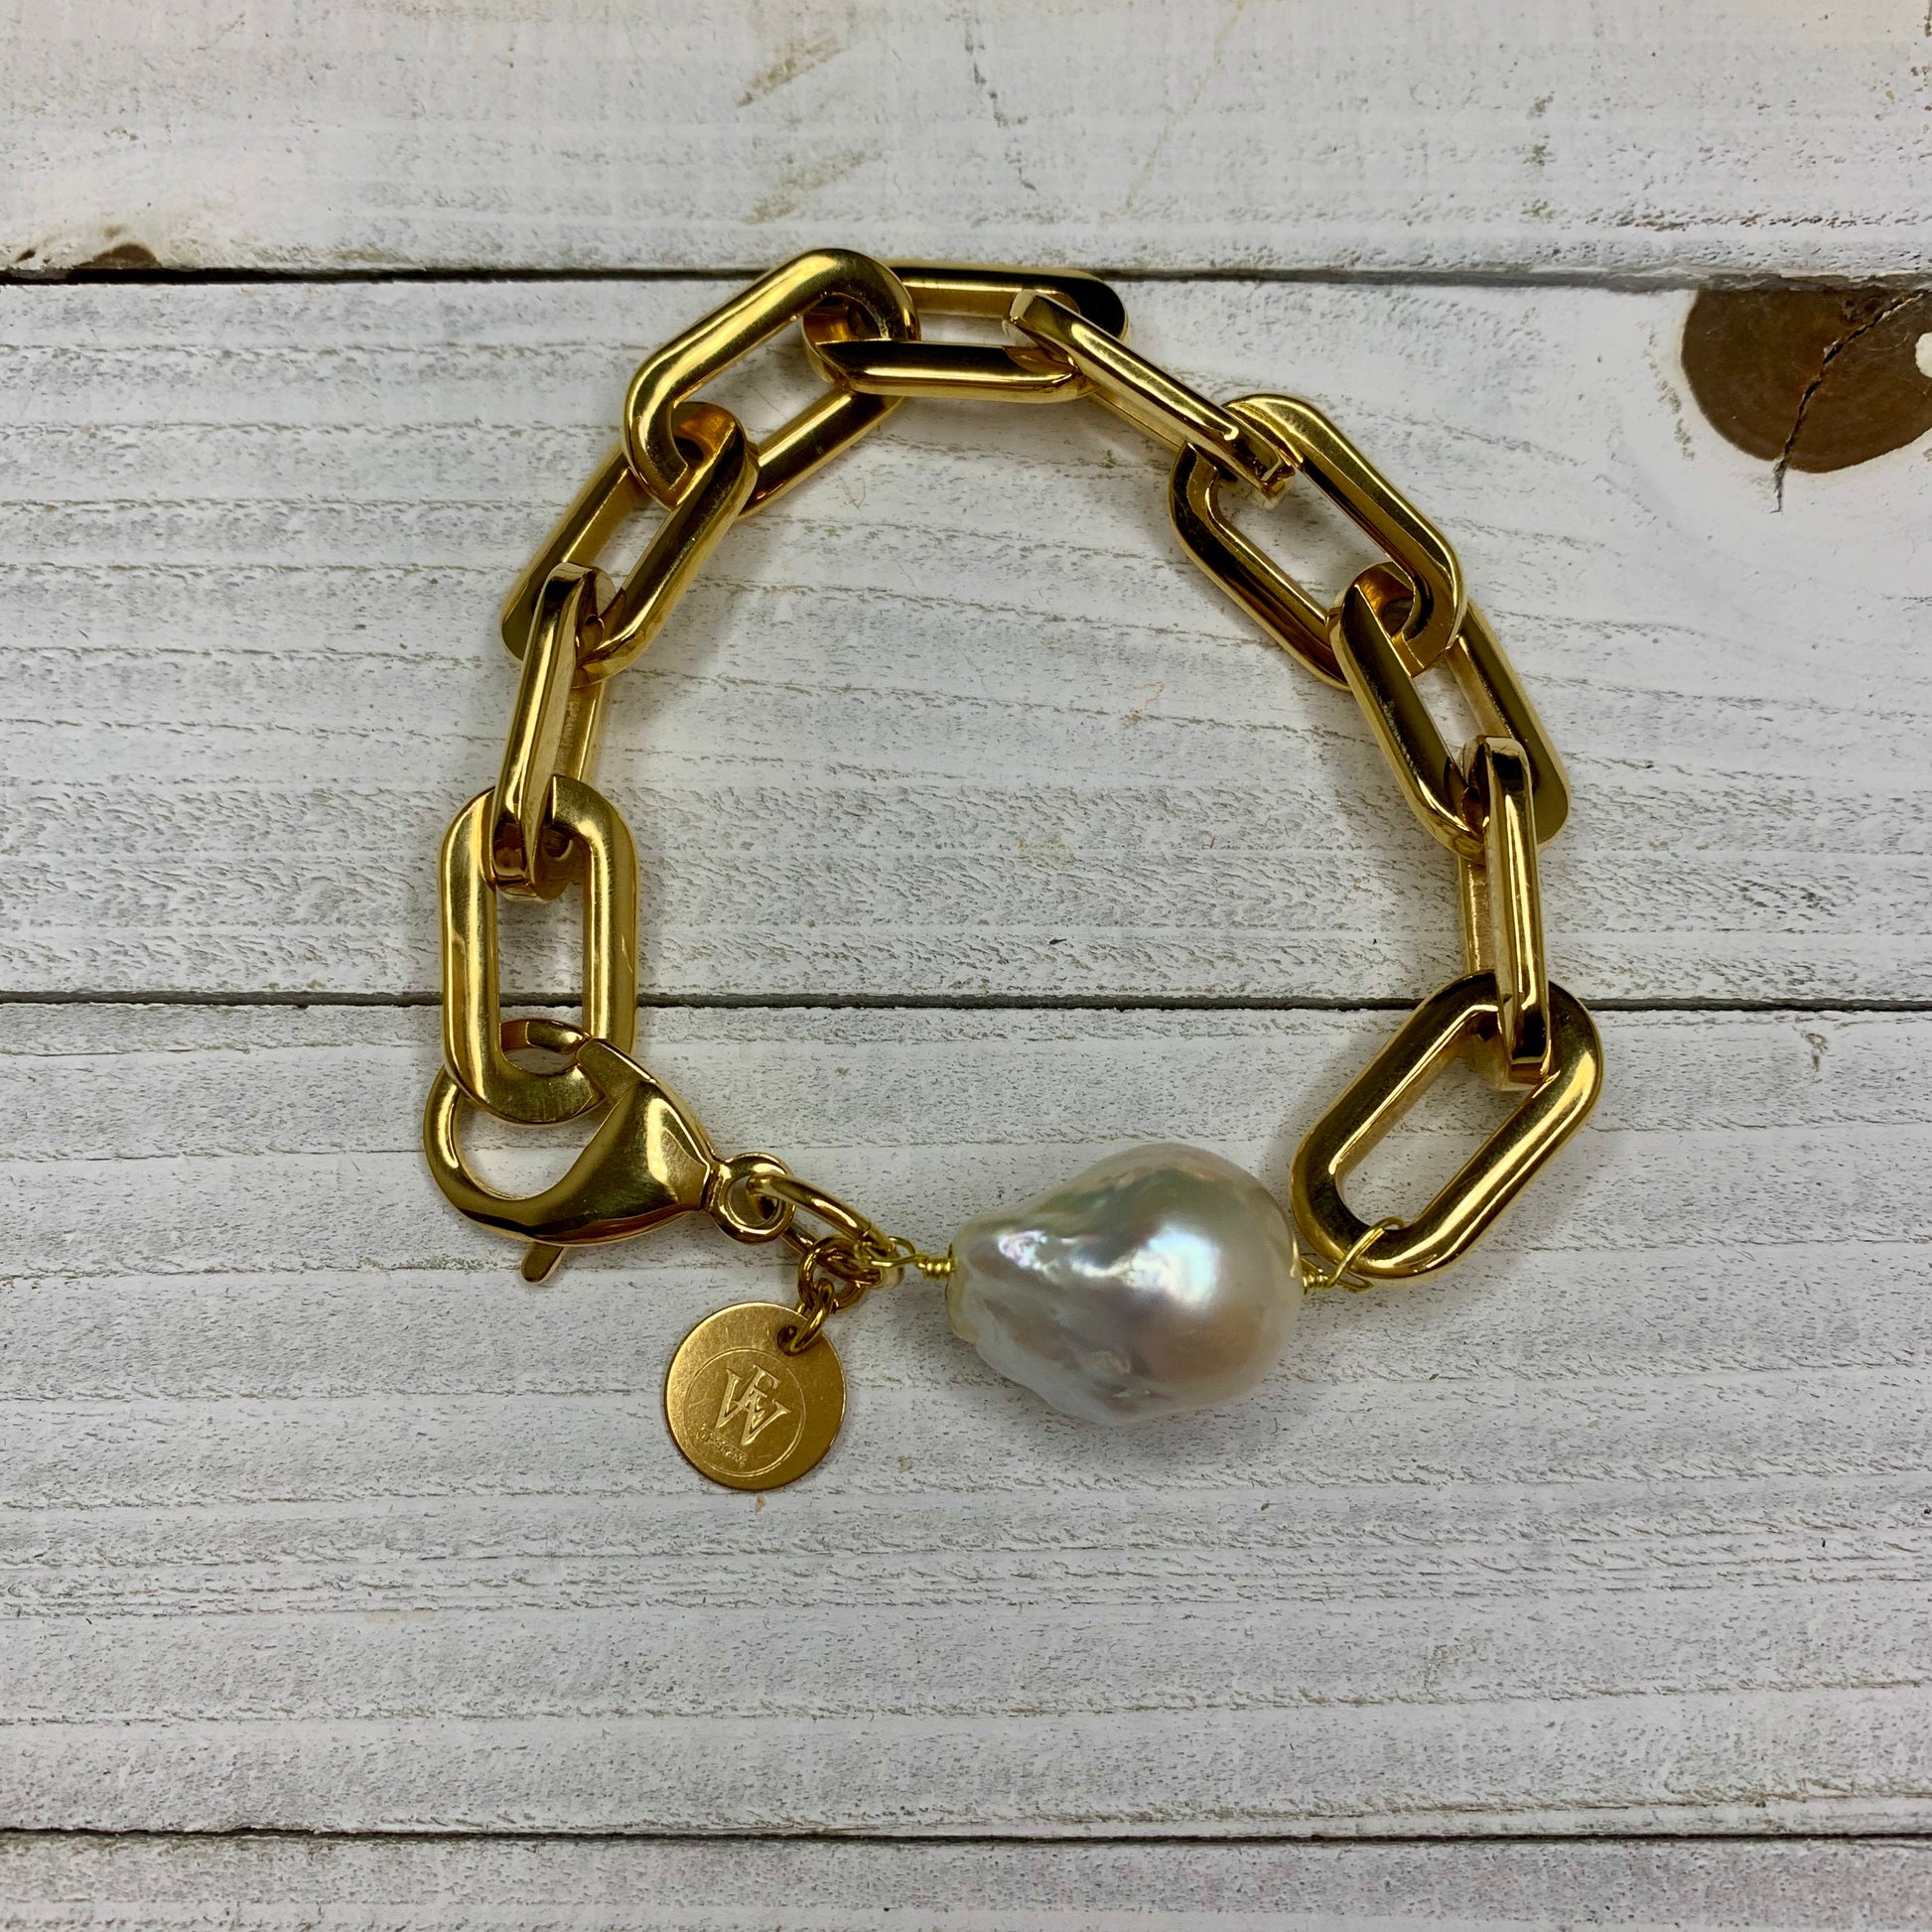  Gold Chain link Bracelet with Baroque Pearl